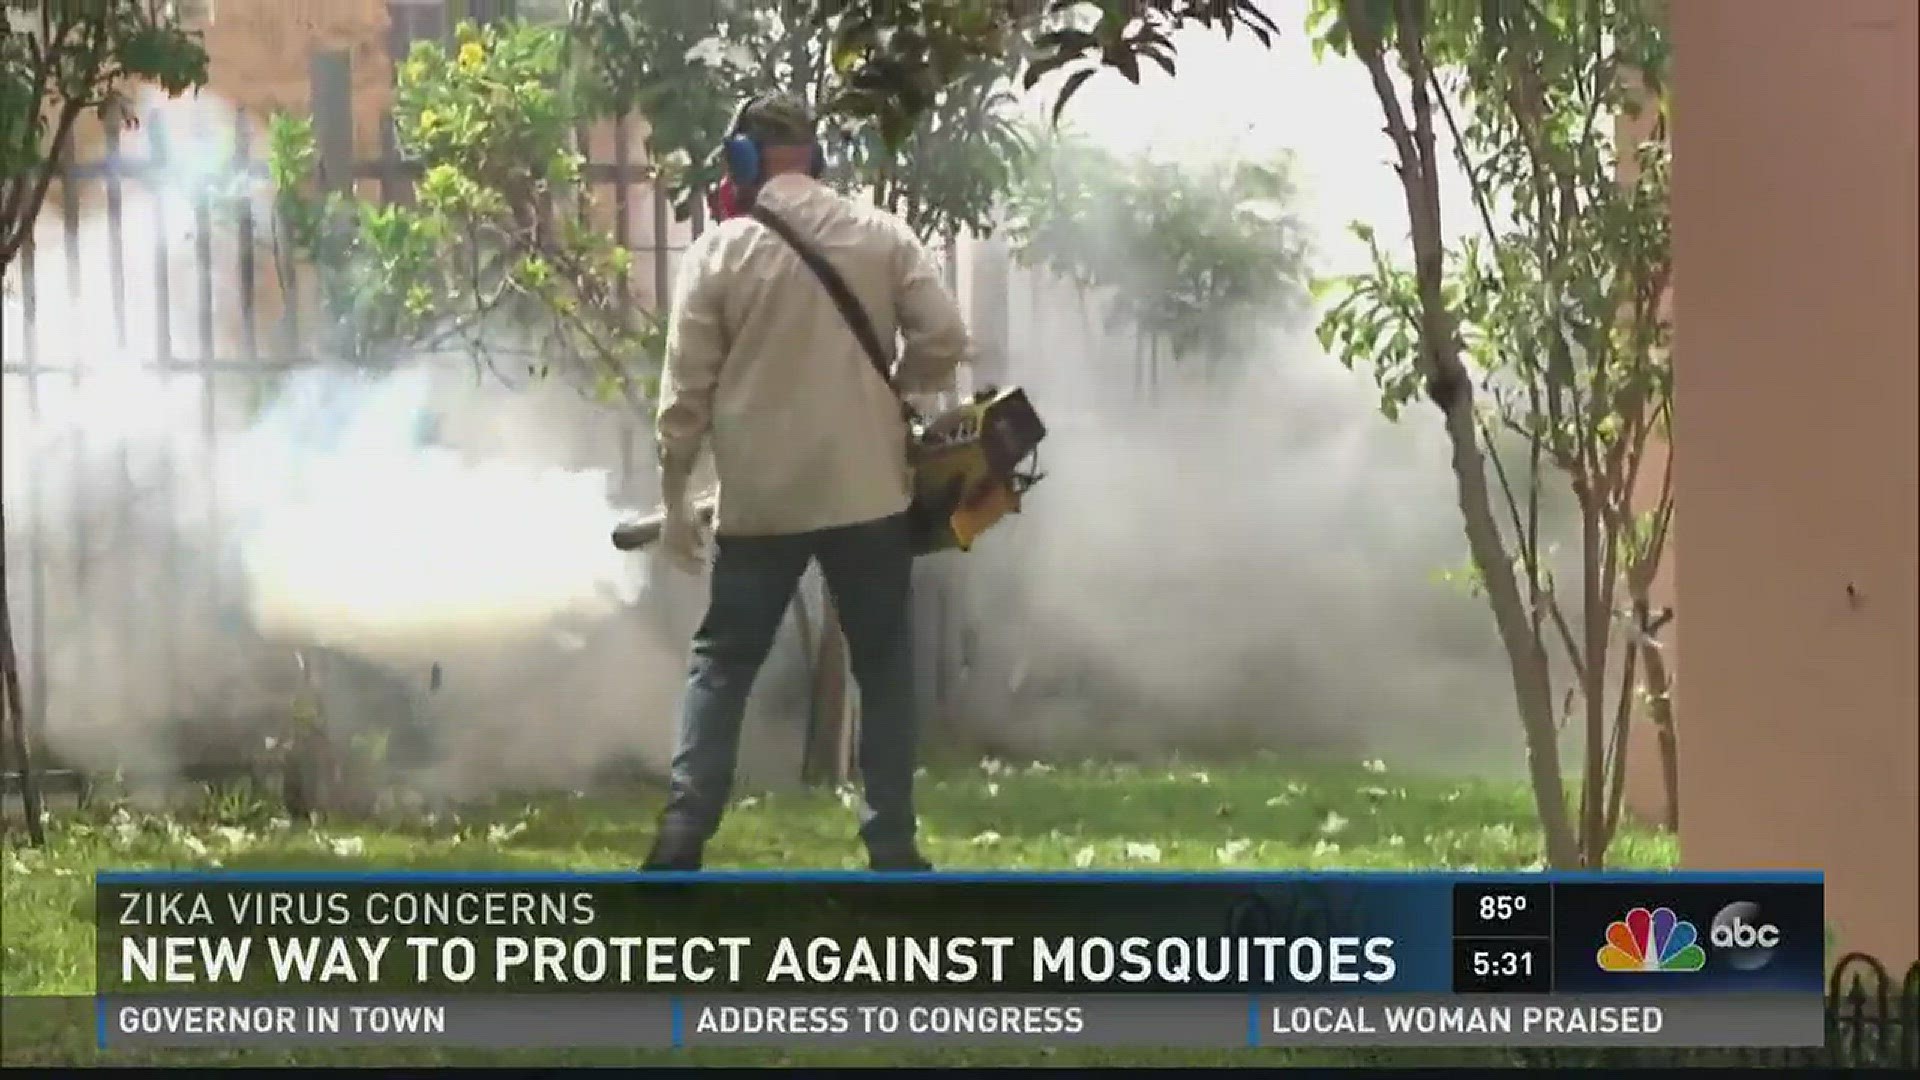 New way to protect against mosquitoes